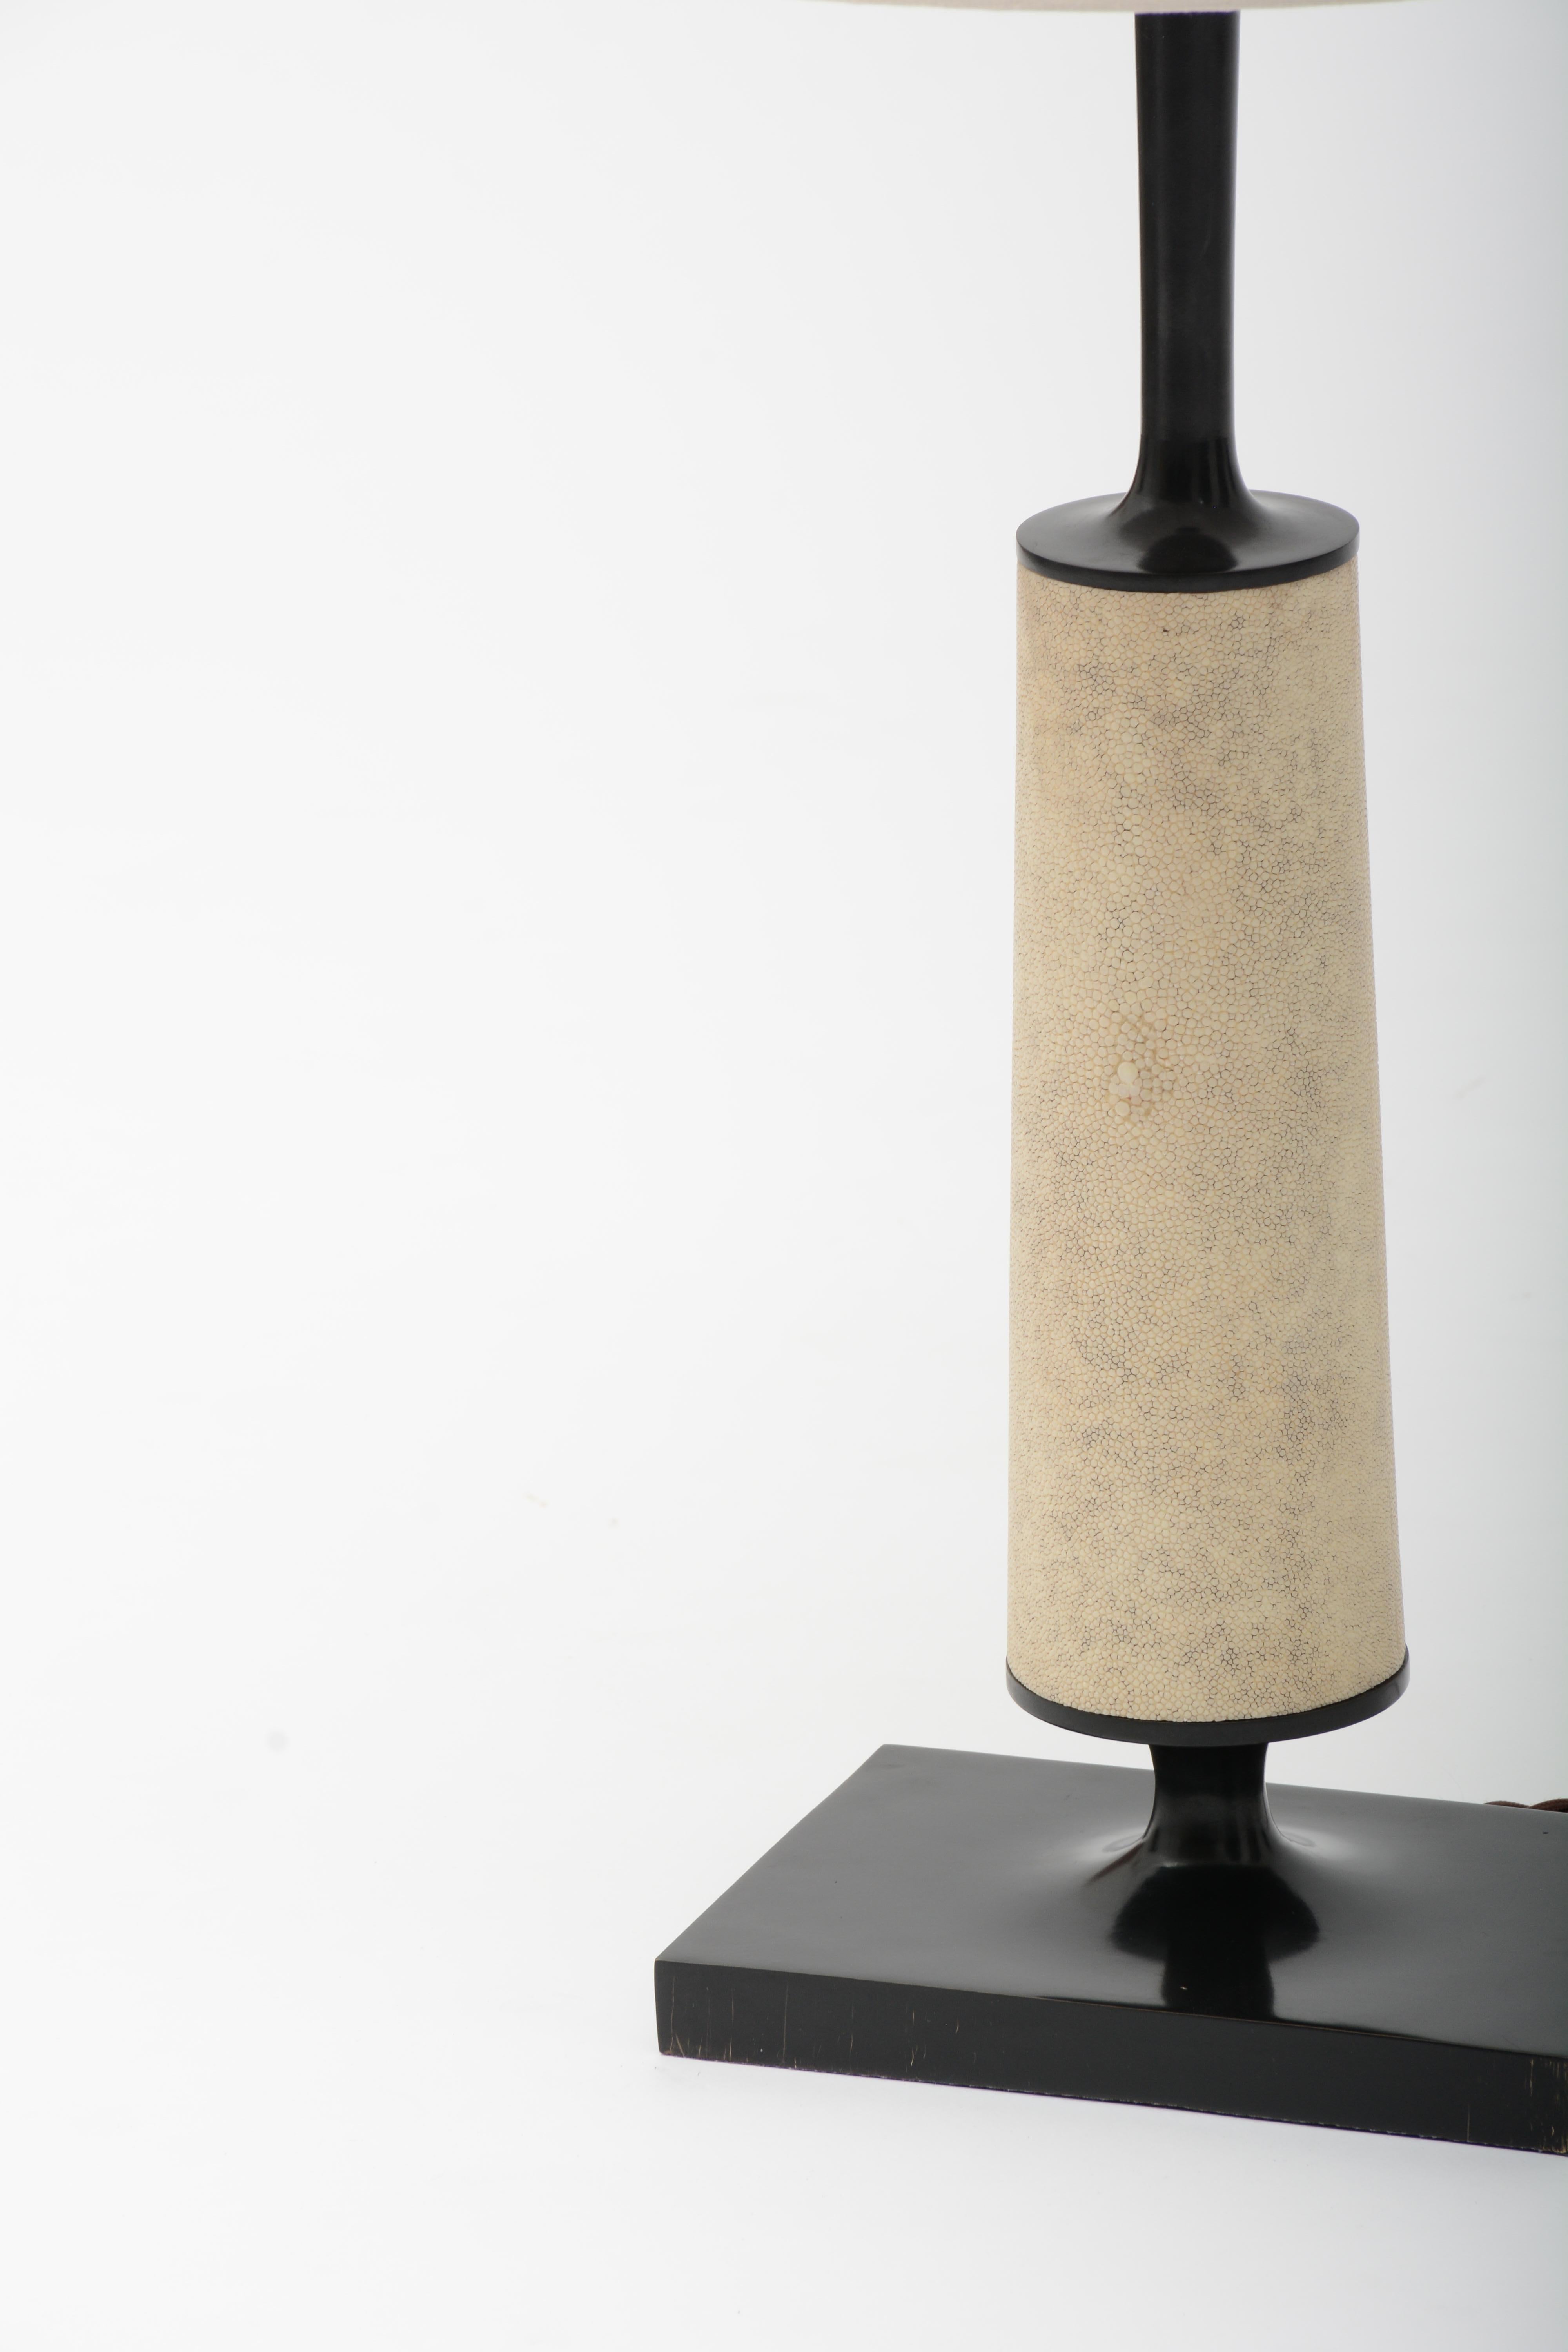 Contemporary Jaya Floor Lamp in Bronze and Ivory Shagreen by Elan Atelier